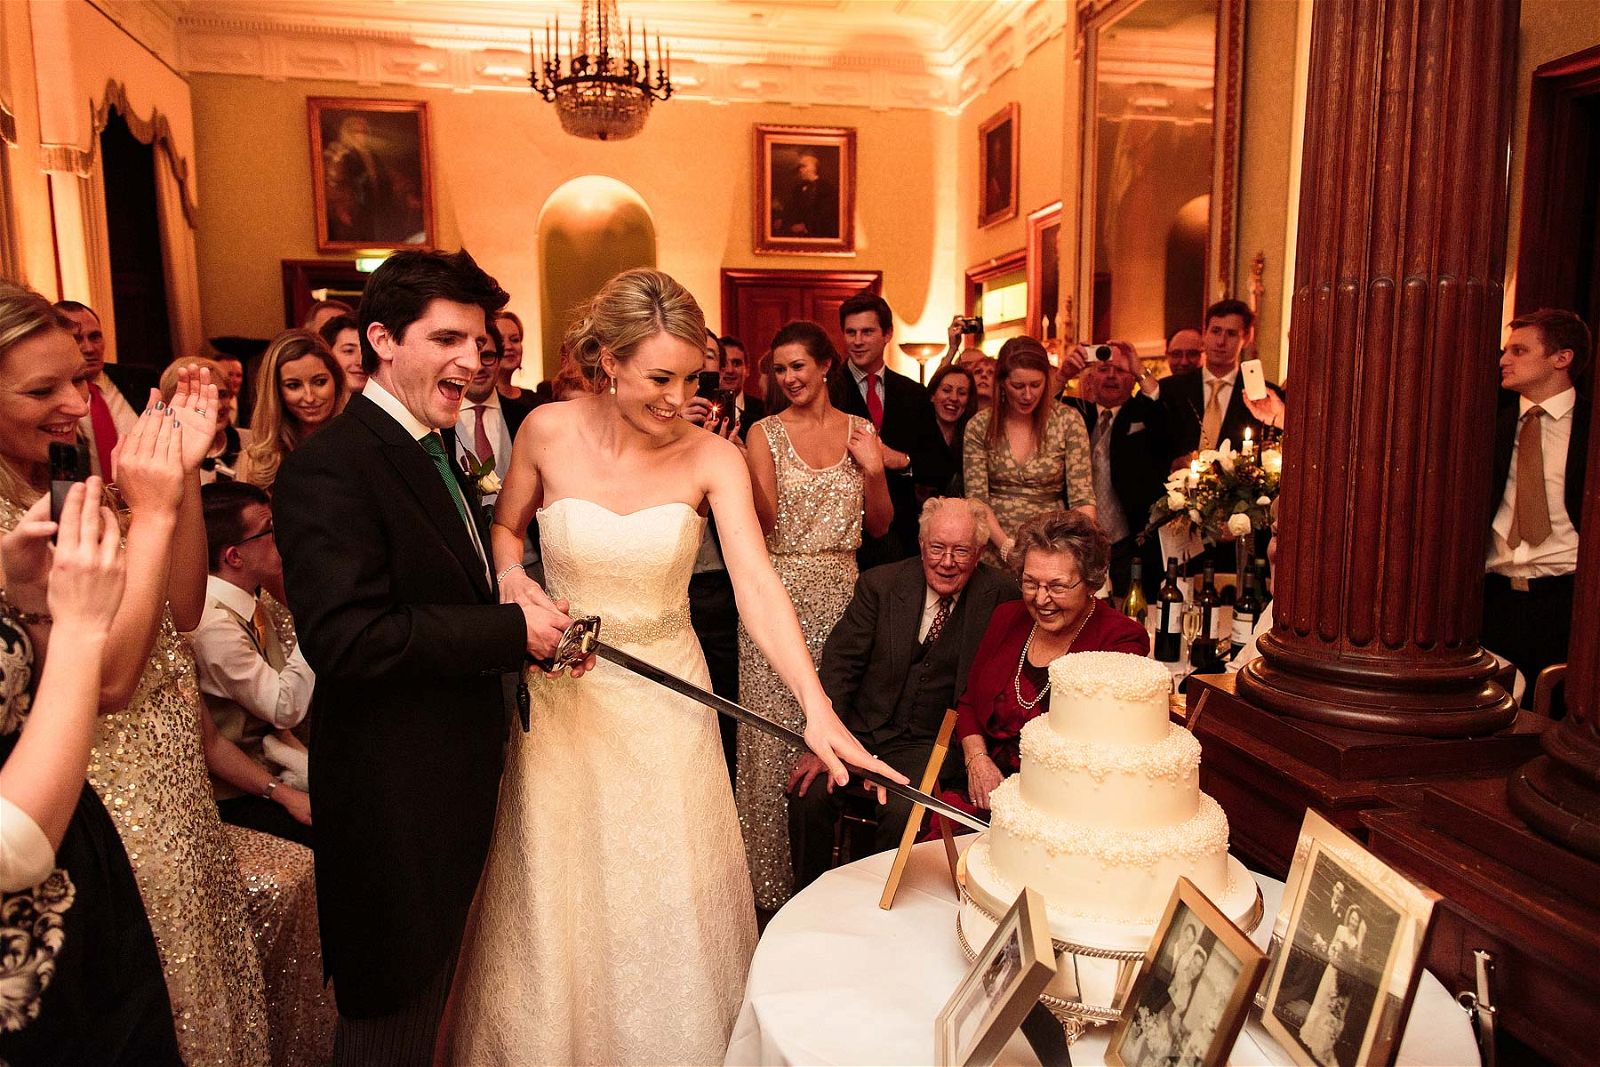 Such a wonderful reaction as the Bride and Groom cut their wedding cake with the grooms sword at Sandon Hall in Stafford by Staffordshire Documentary Wedding Photographer Stuart James